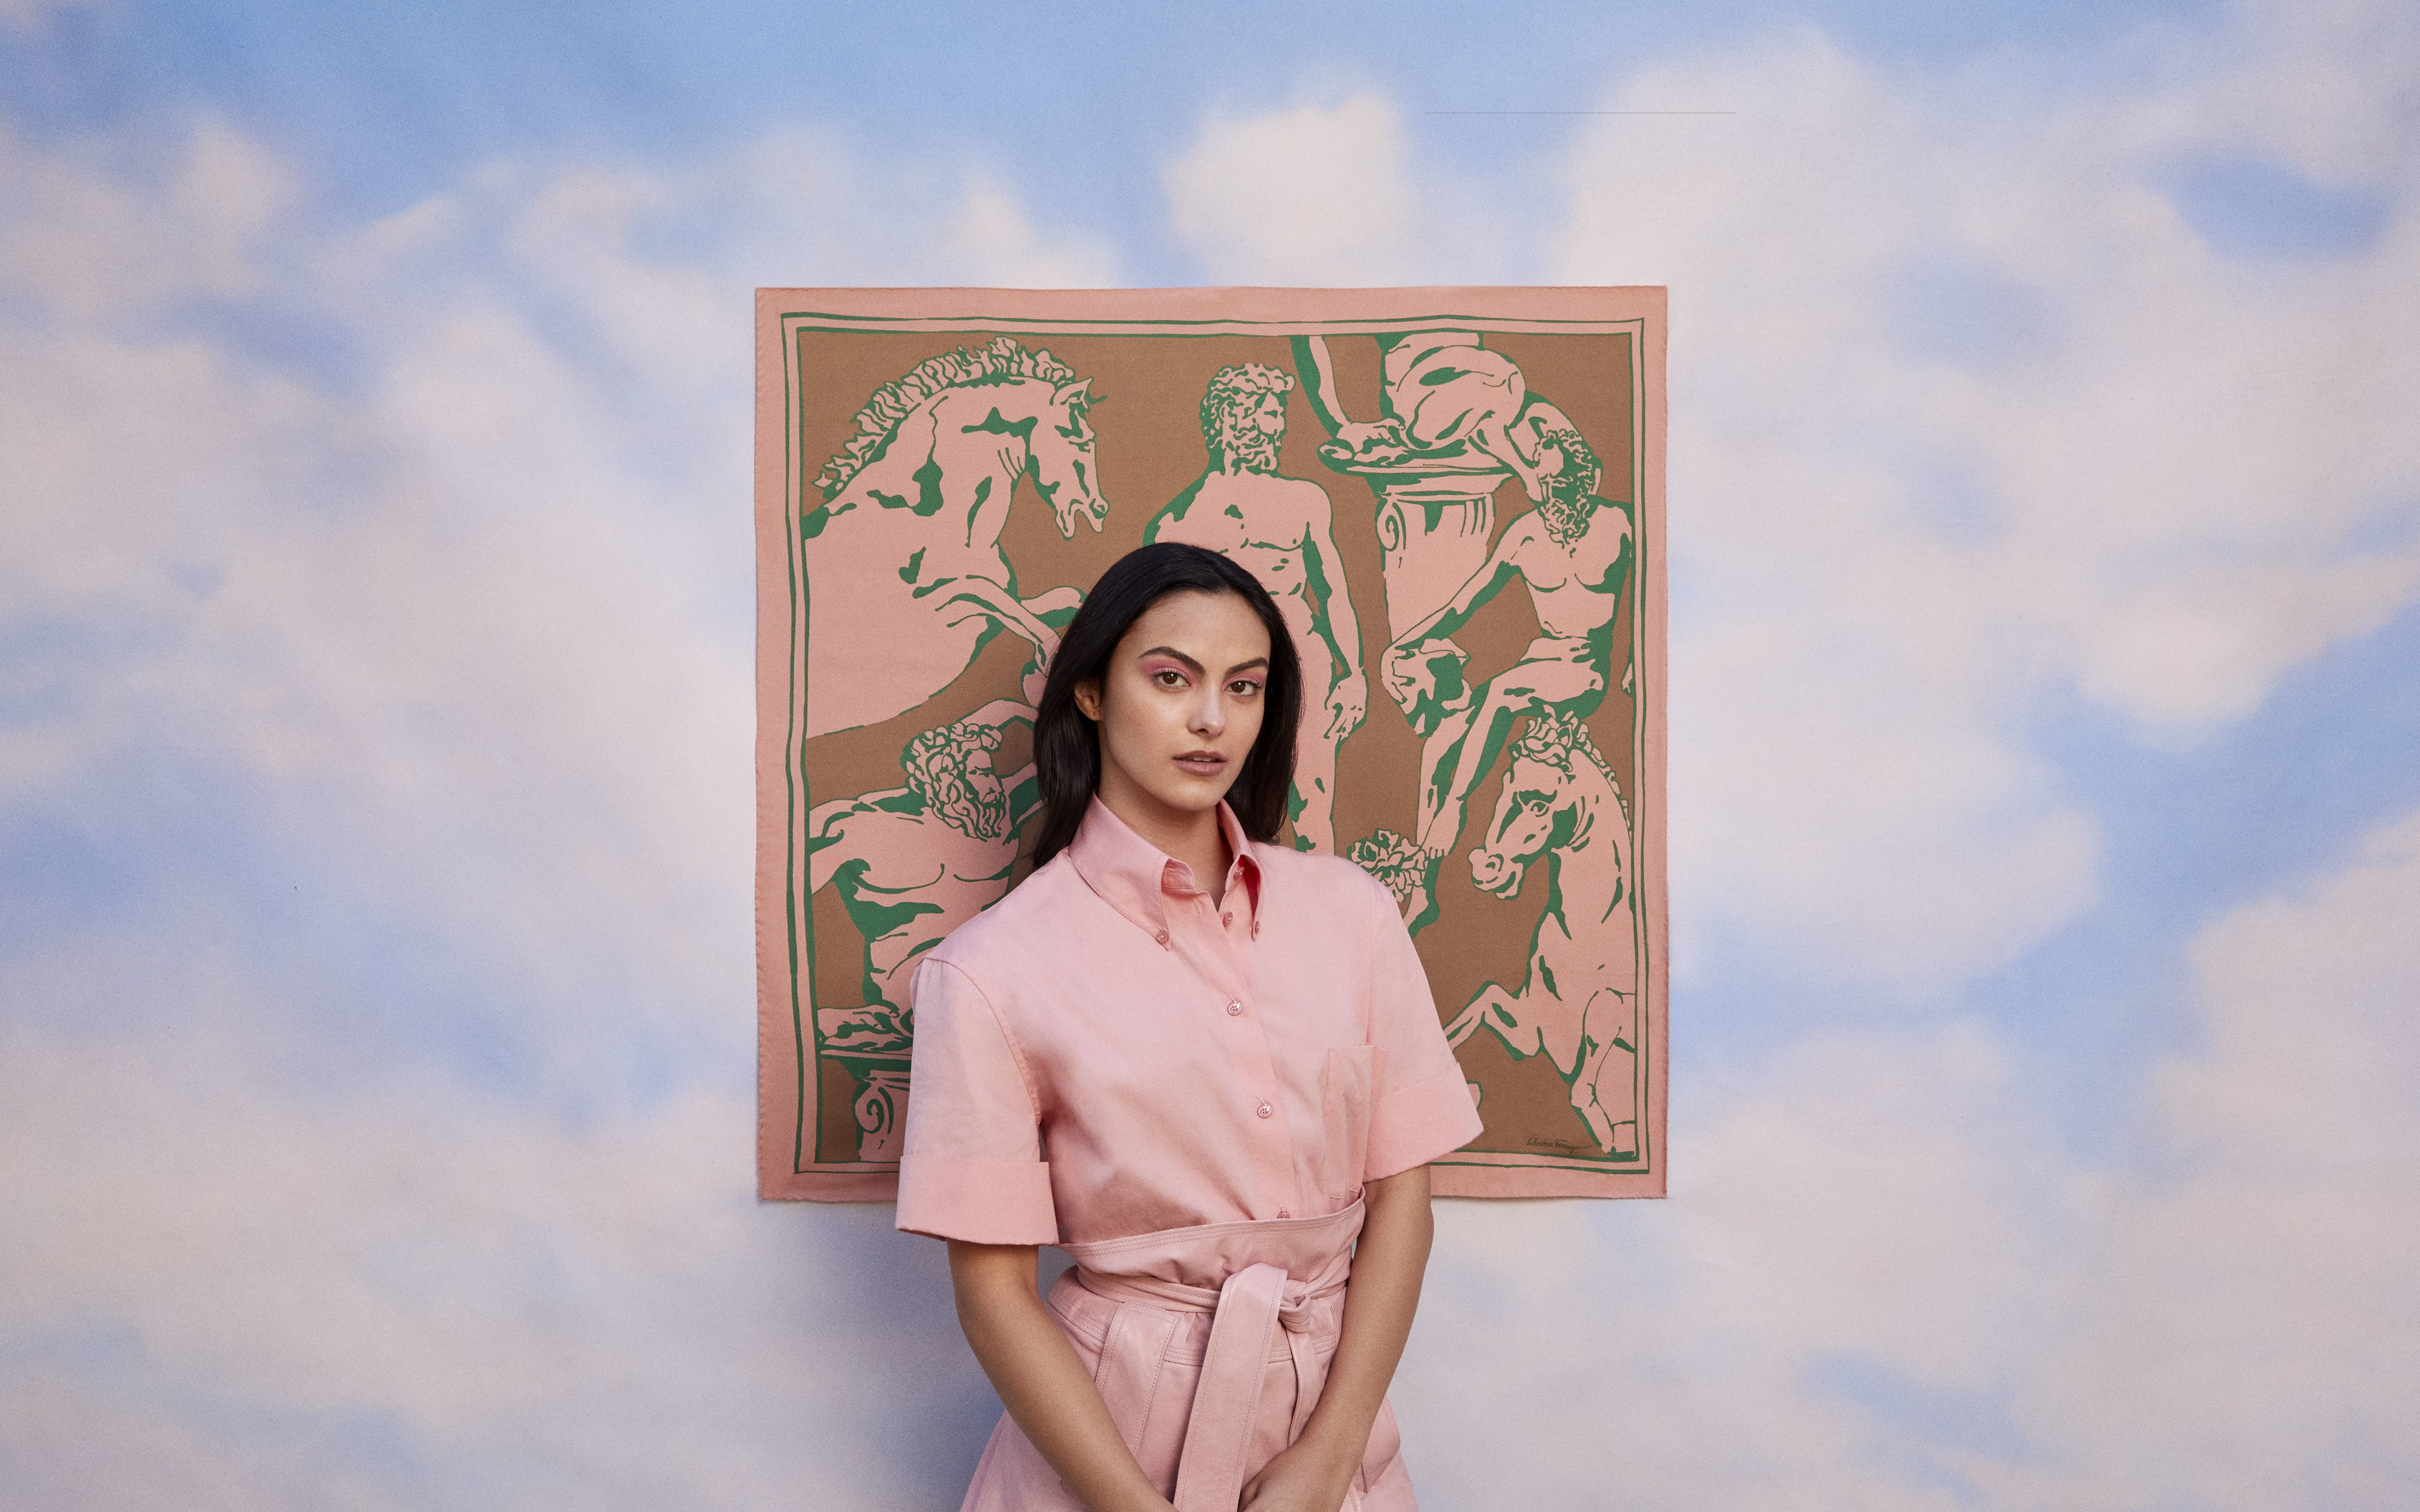 4K Camila Mendes Wallpapers